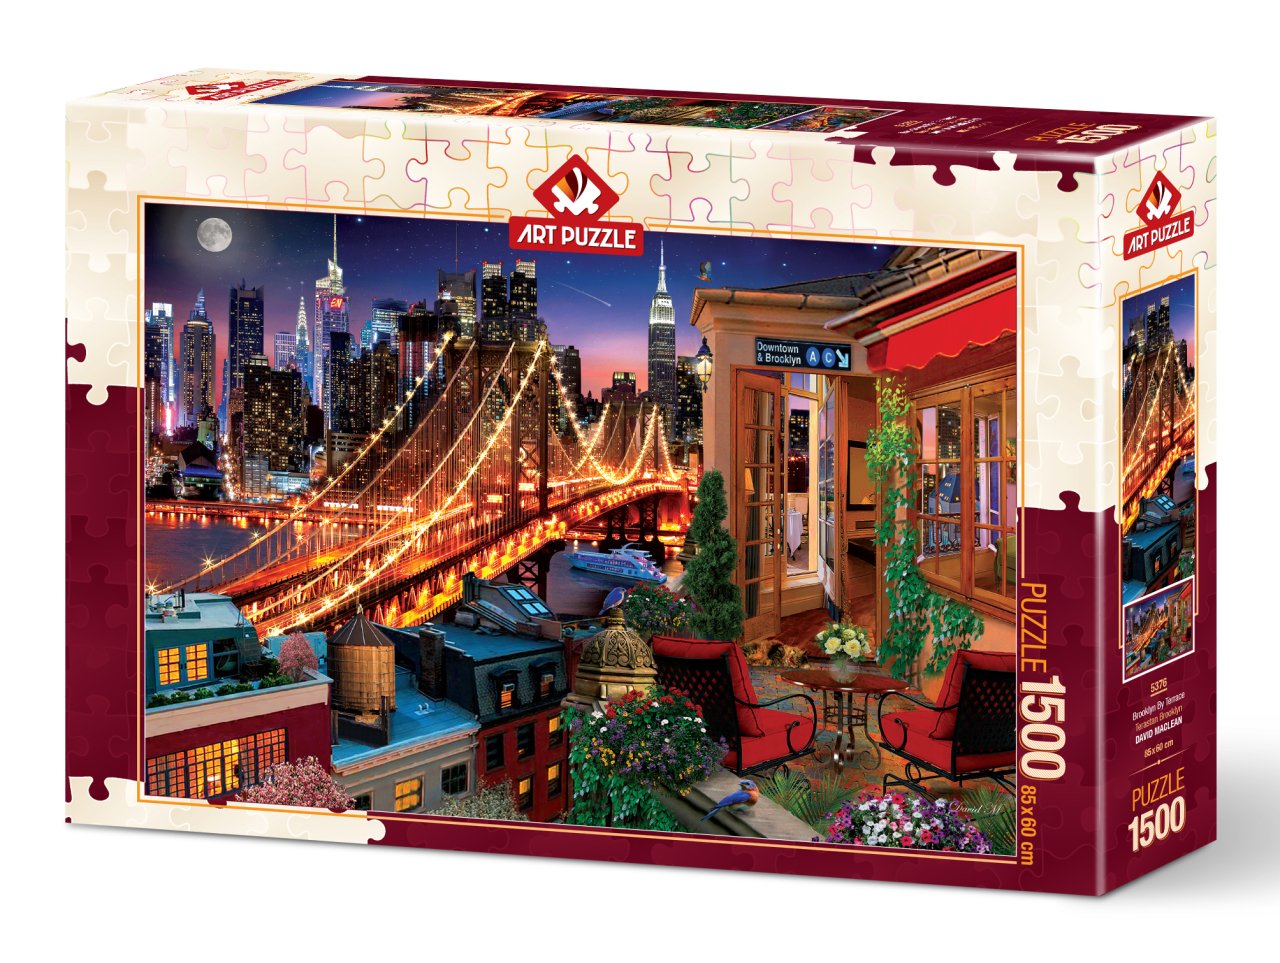 Art Puzzle - Brooklyn By Terrace - 1500 Piece Jigsaw Puzzle